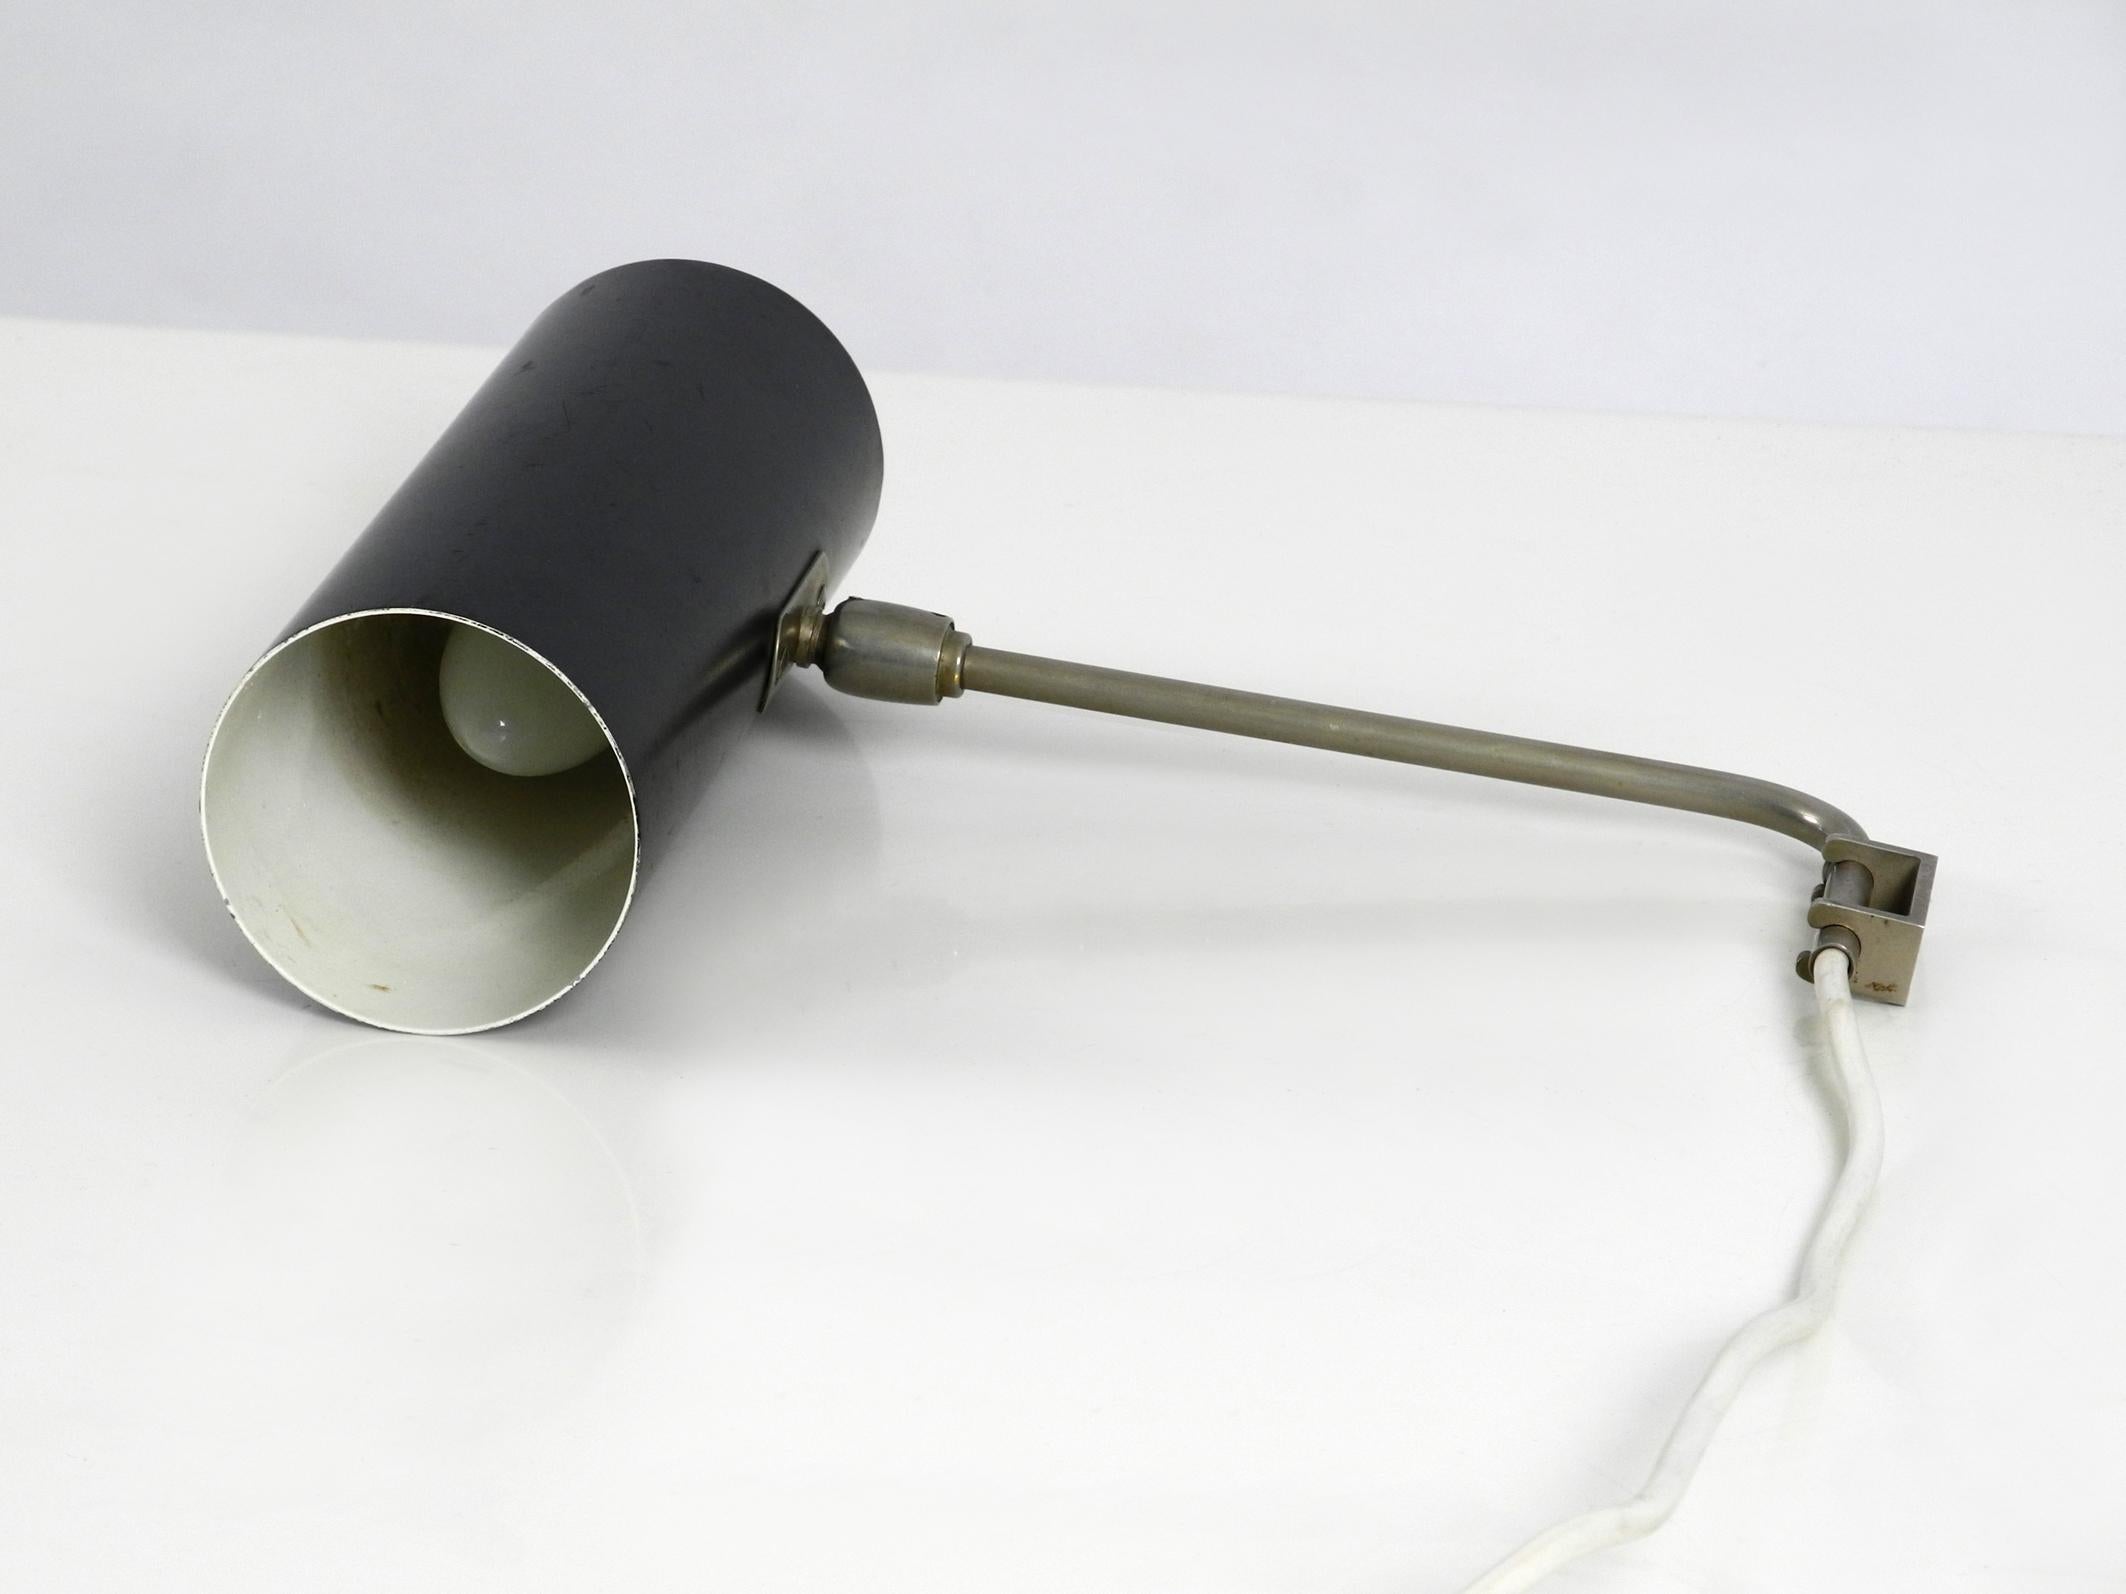 Original mid century metal wall lamp with freely movable neck.
Manufacturer of Kaiser lights. Made in Germany.
Metal screen. Neck and wall mounting made of nickel-plated metal.
Infinitely variable in all directions.
Beautiful minimalist design